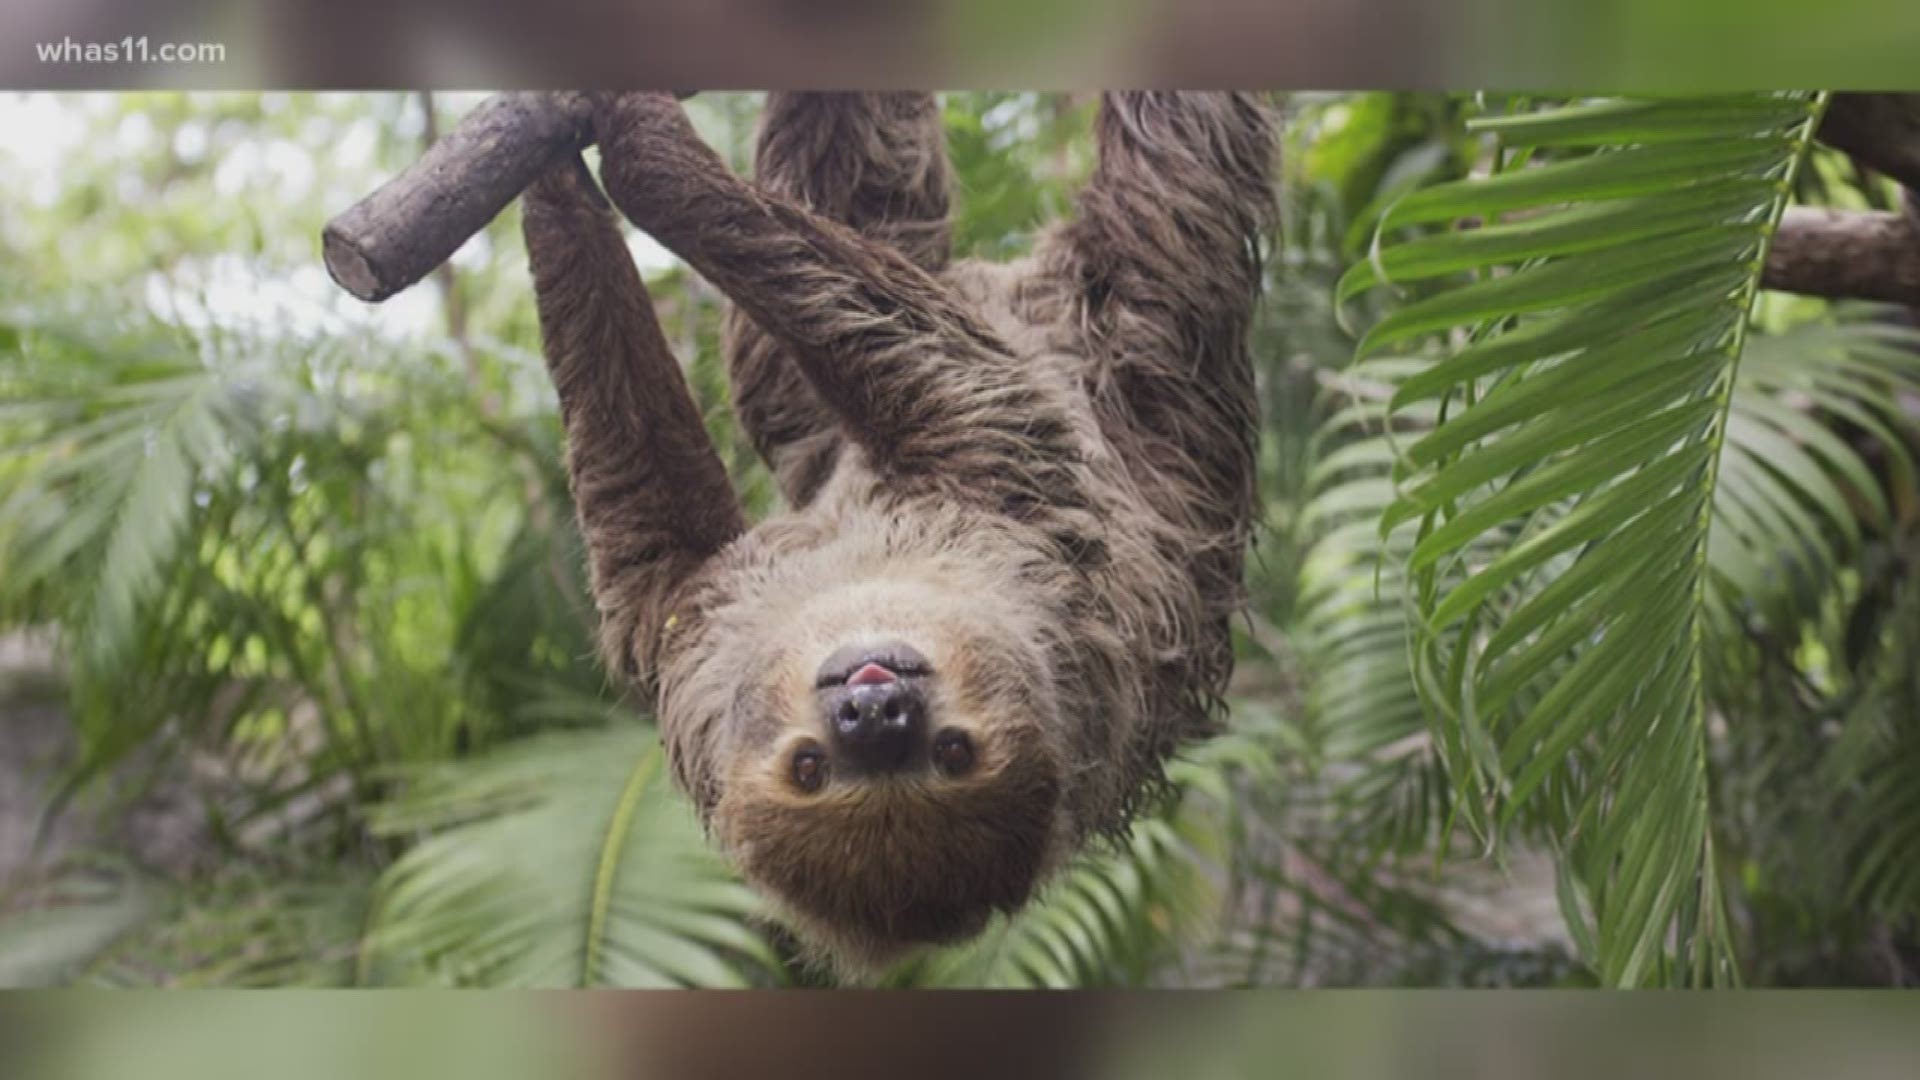 Zoo officials say the sloths are nocturnal, solitary and known for their slow movements.. as we know.